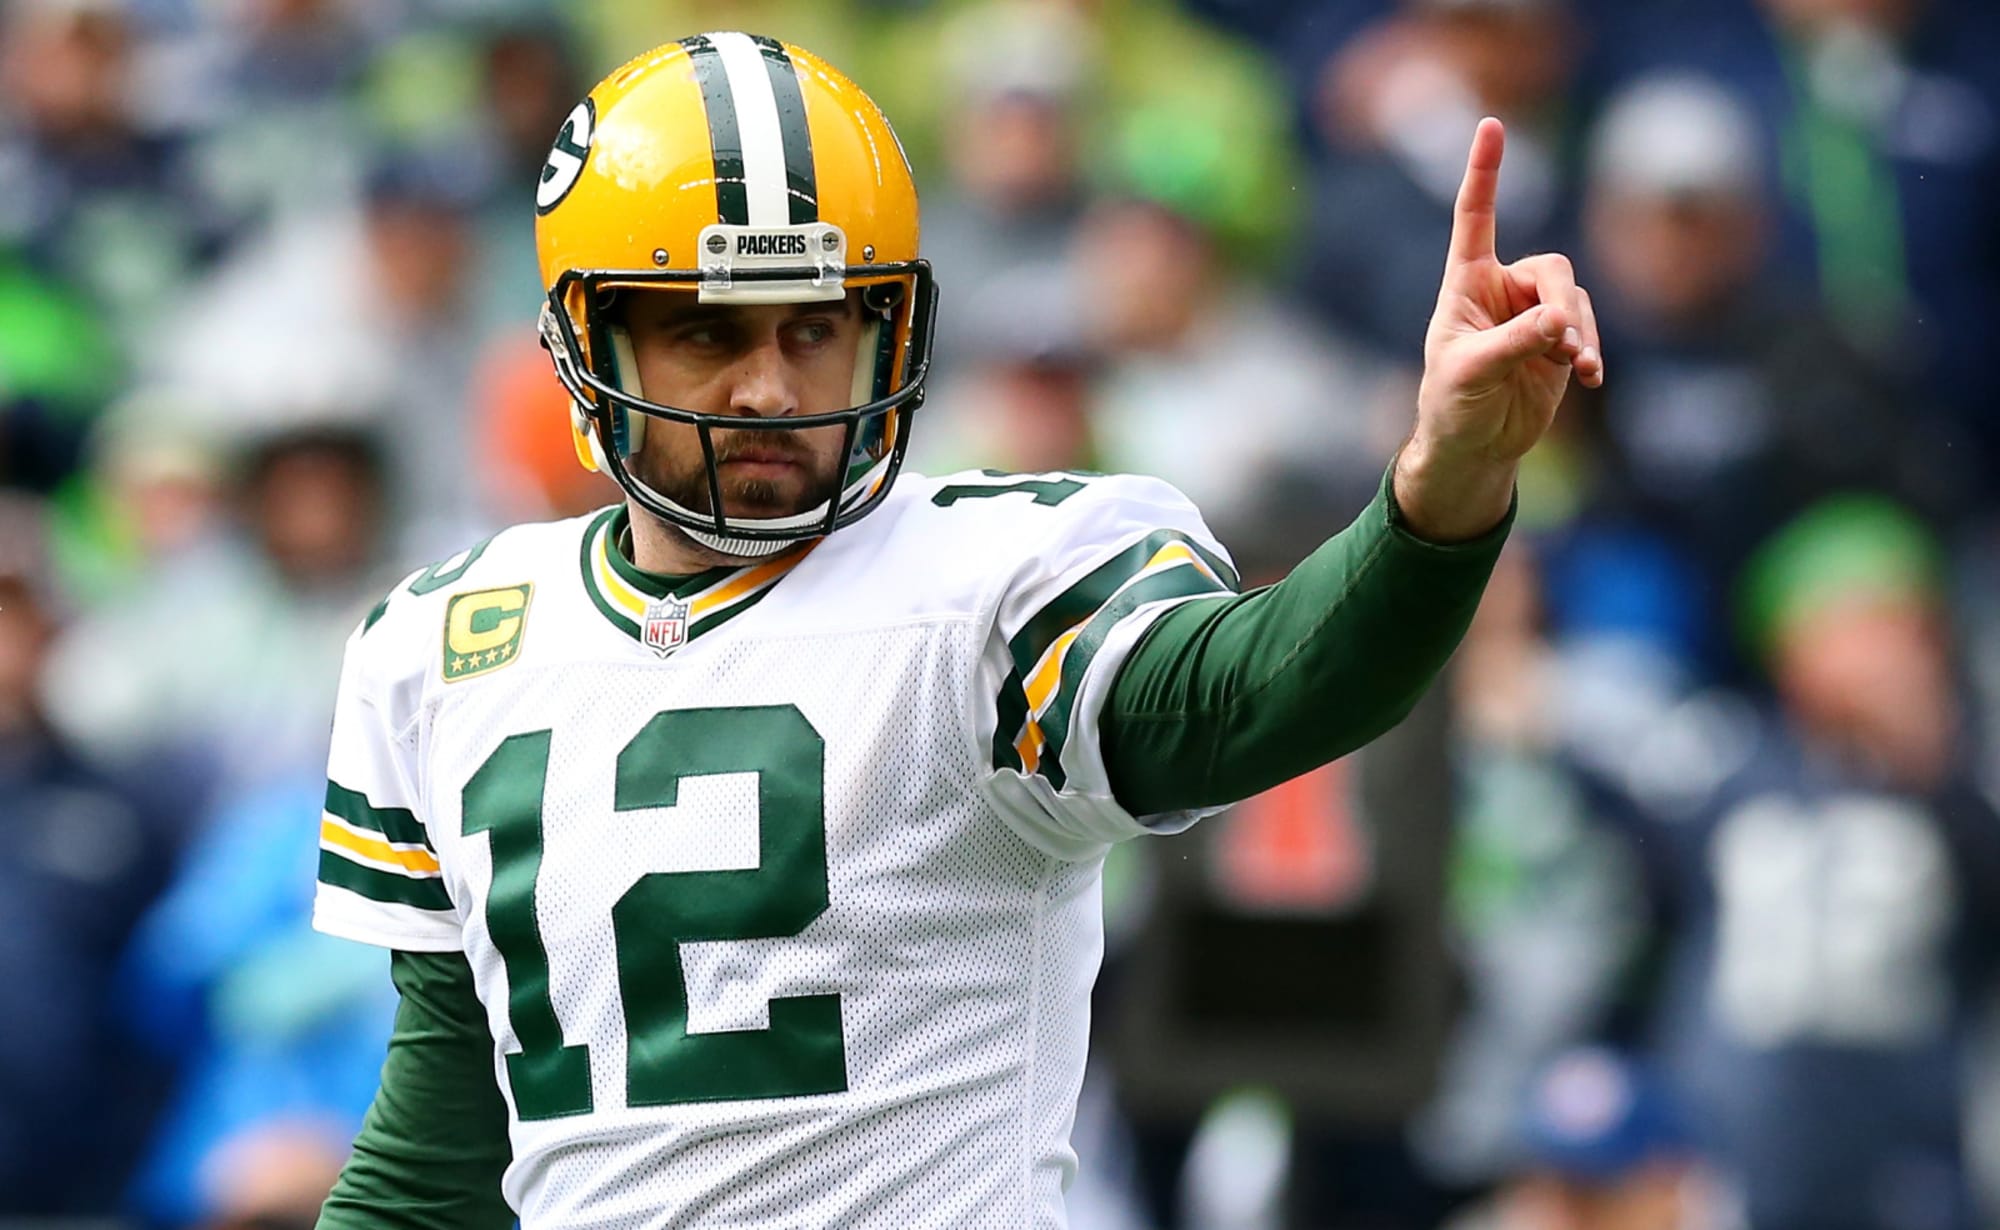 Green Bay Packers QB Aaron Rodgers, making gesture towards sideline